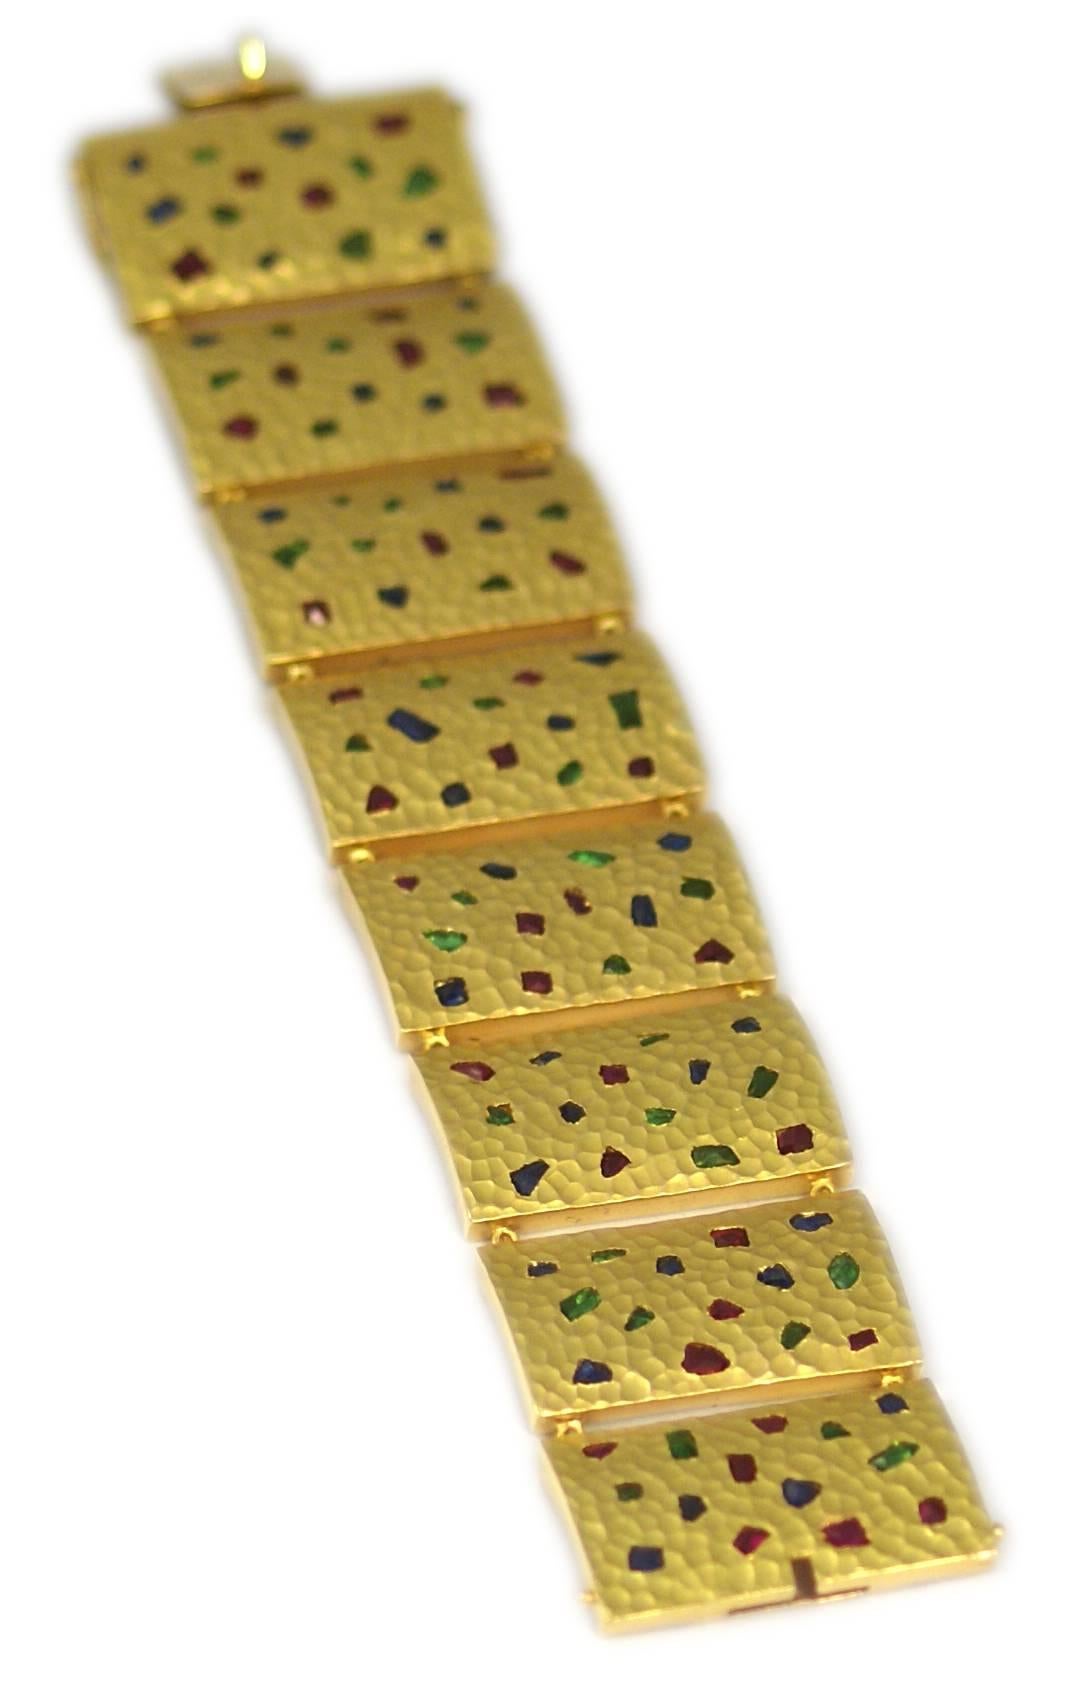 A peculiar 18kt hammered yellow gold bracelet composed of rectangular interlinked elements, embellished with irregular cut emeralds, rubies and sapphires. Circa 1970